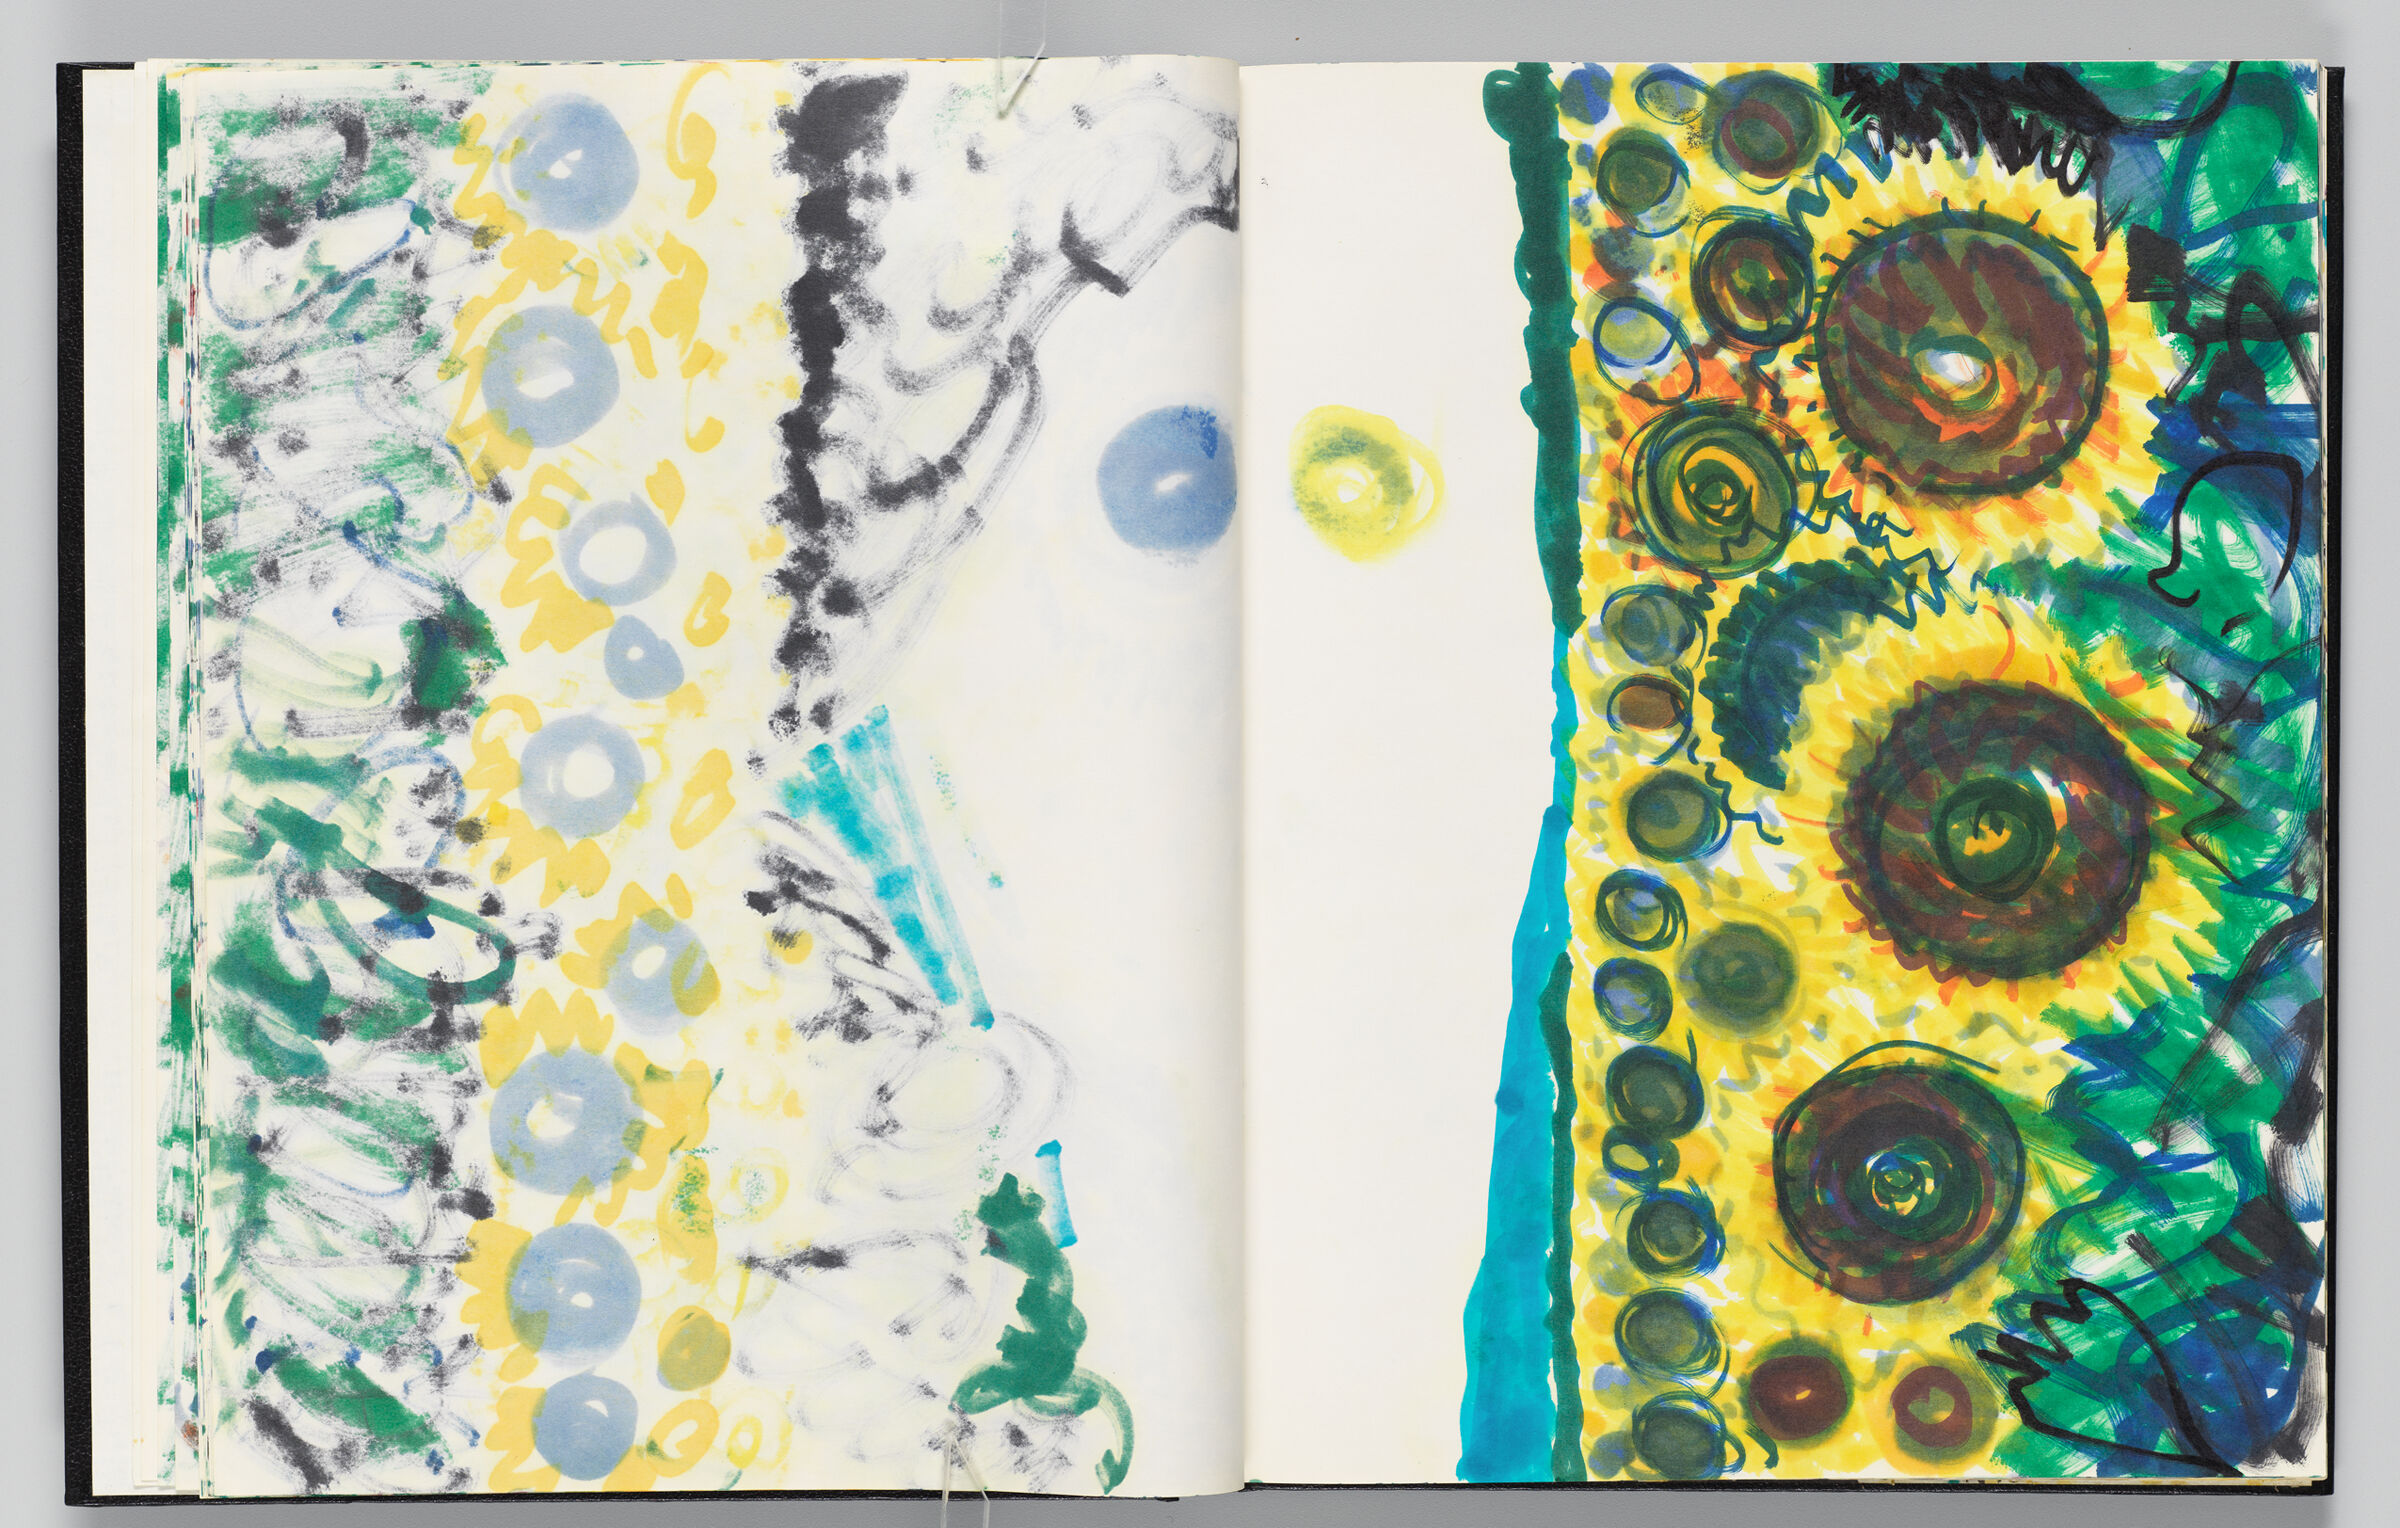 Untitled (Bleed-Through Of Previous Page, Left Page); Untitled (Landscape With Sunflowers, Right Page)